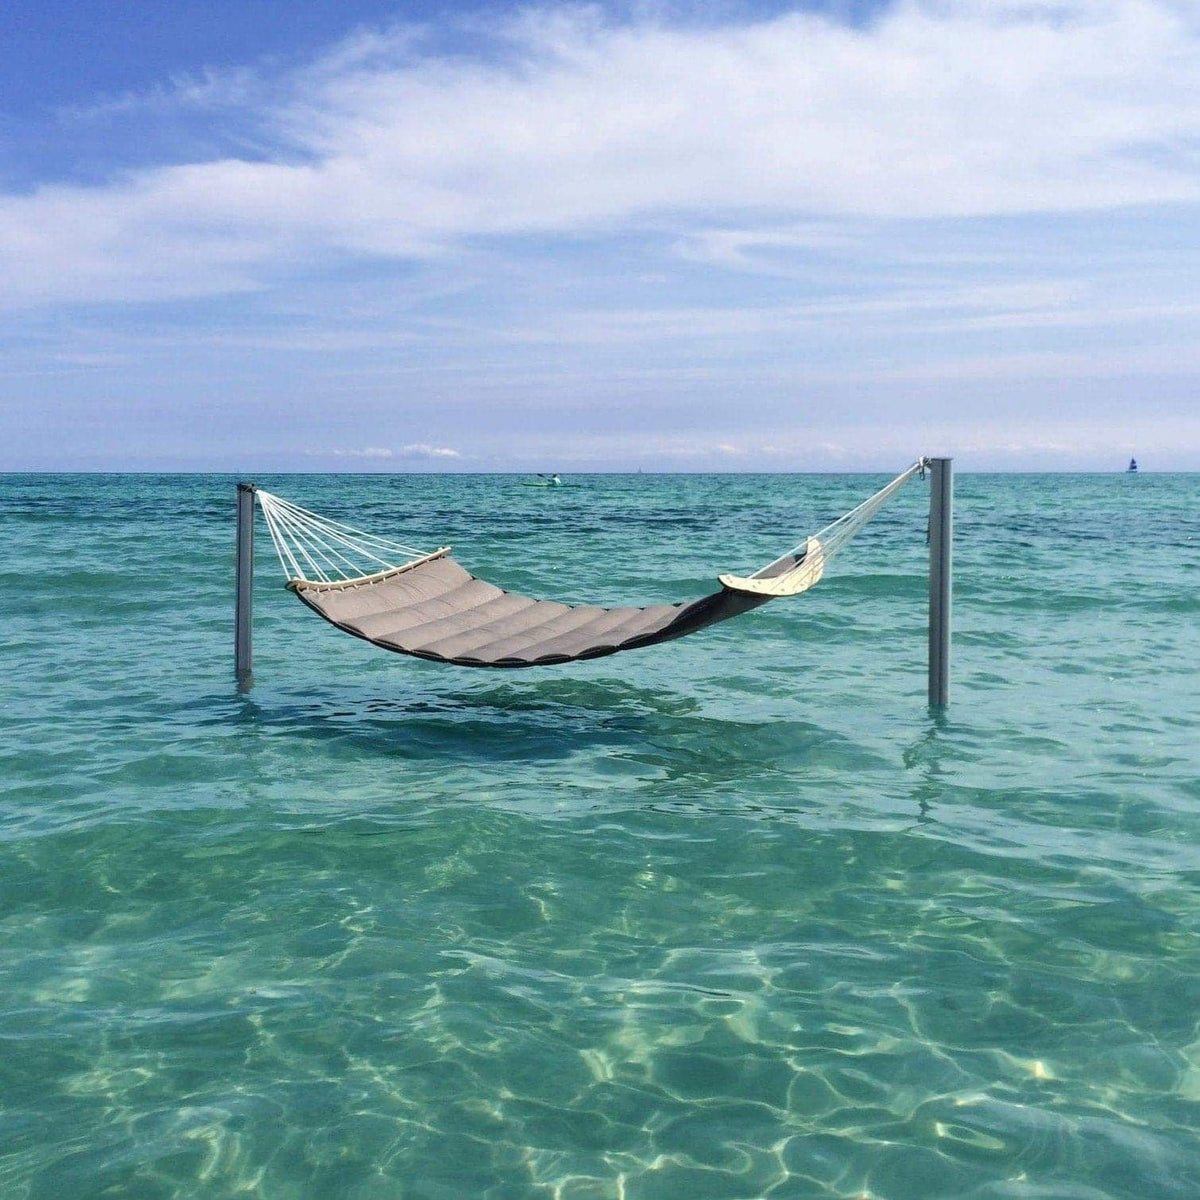 Luxurious Double Waterproof Hammock Without Frame - By Trimm - Real Scandinavian Quality